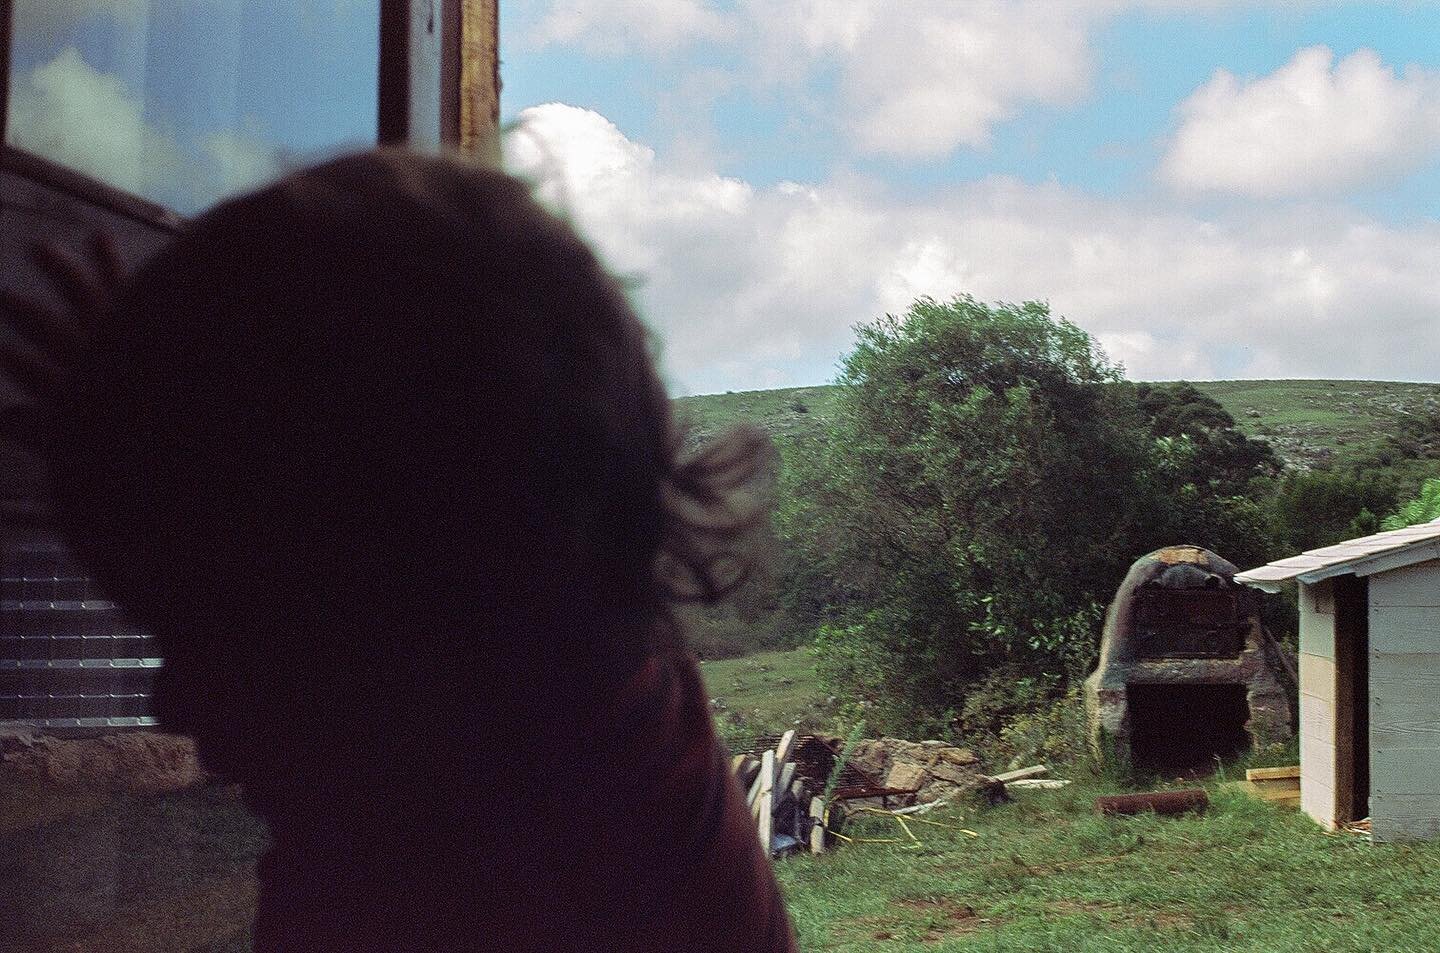 March 2021 | Villas Serrana, Lavalleja, Uruguay ~ After another year the campesino leans against his cabin to take a moment&mdash;before the next one begins.